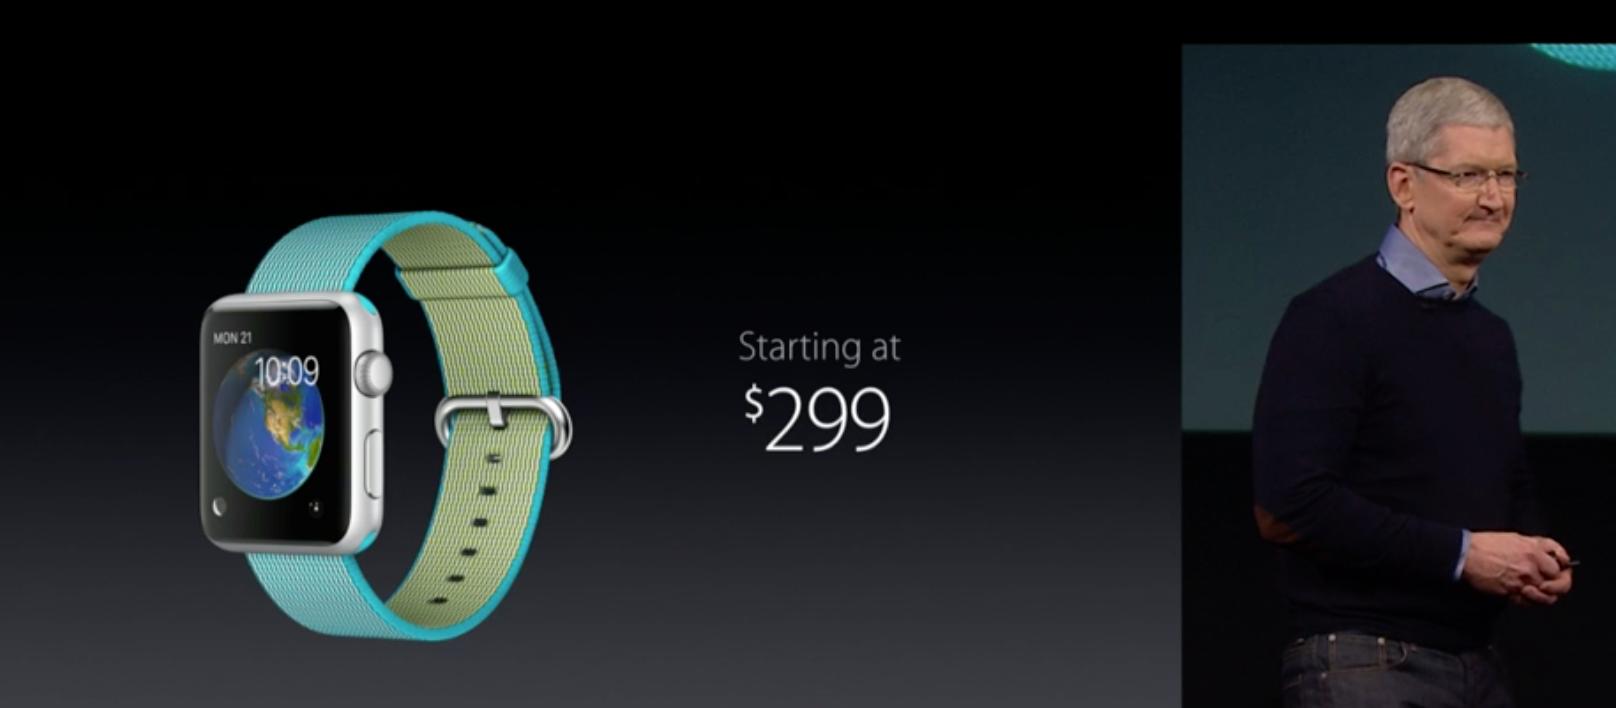 Apple Drops Apple Watch Starting Price To $299